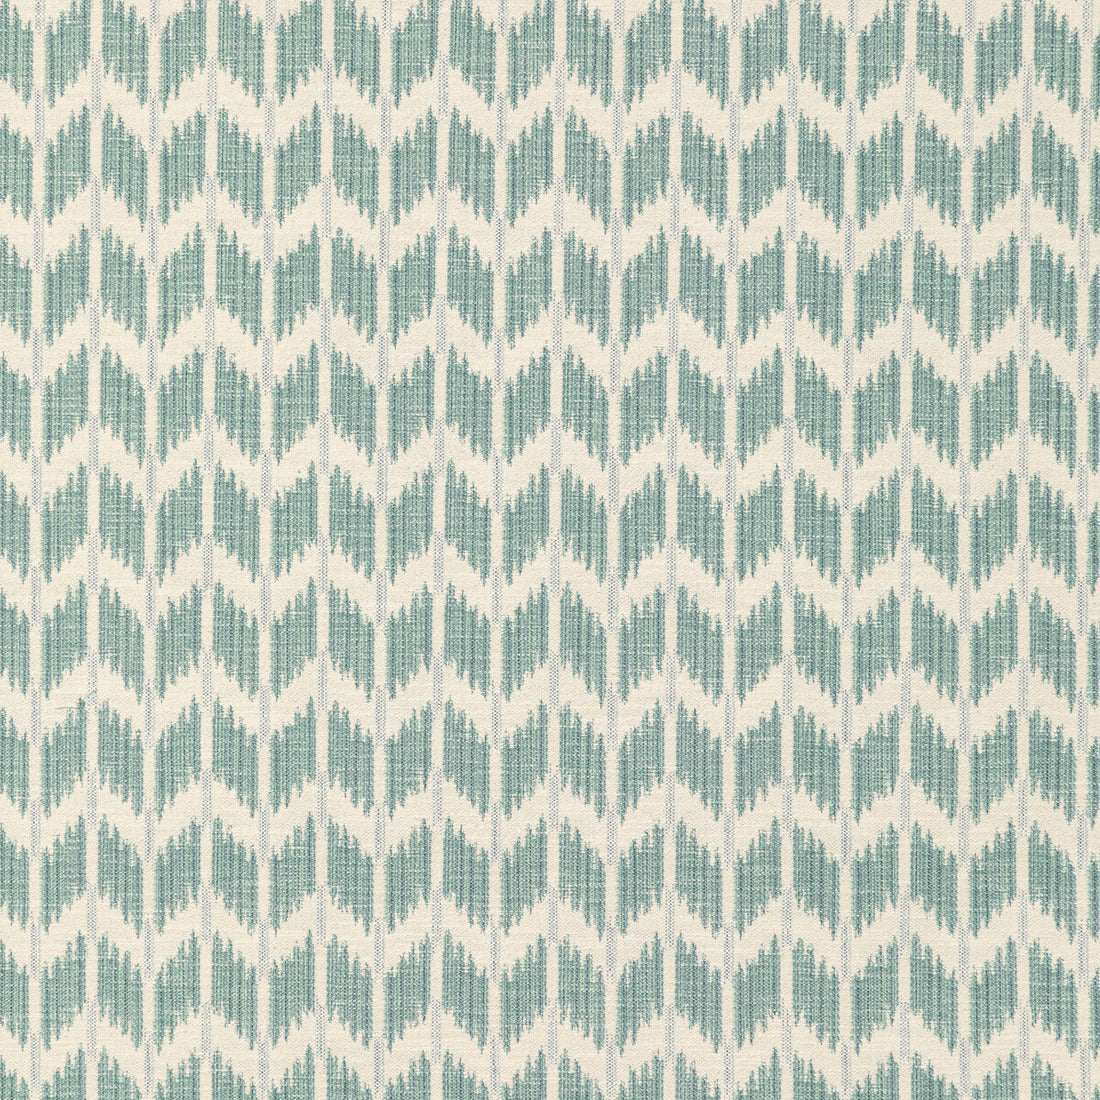 Lorient Weave fabric in aqua color - pattern 8022111.13.0 - by Brunschwig &amp; Fils in the Lorient Weaves collection